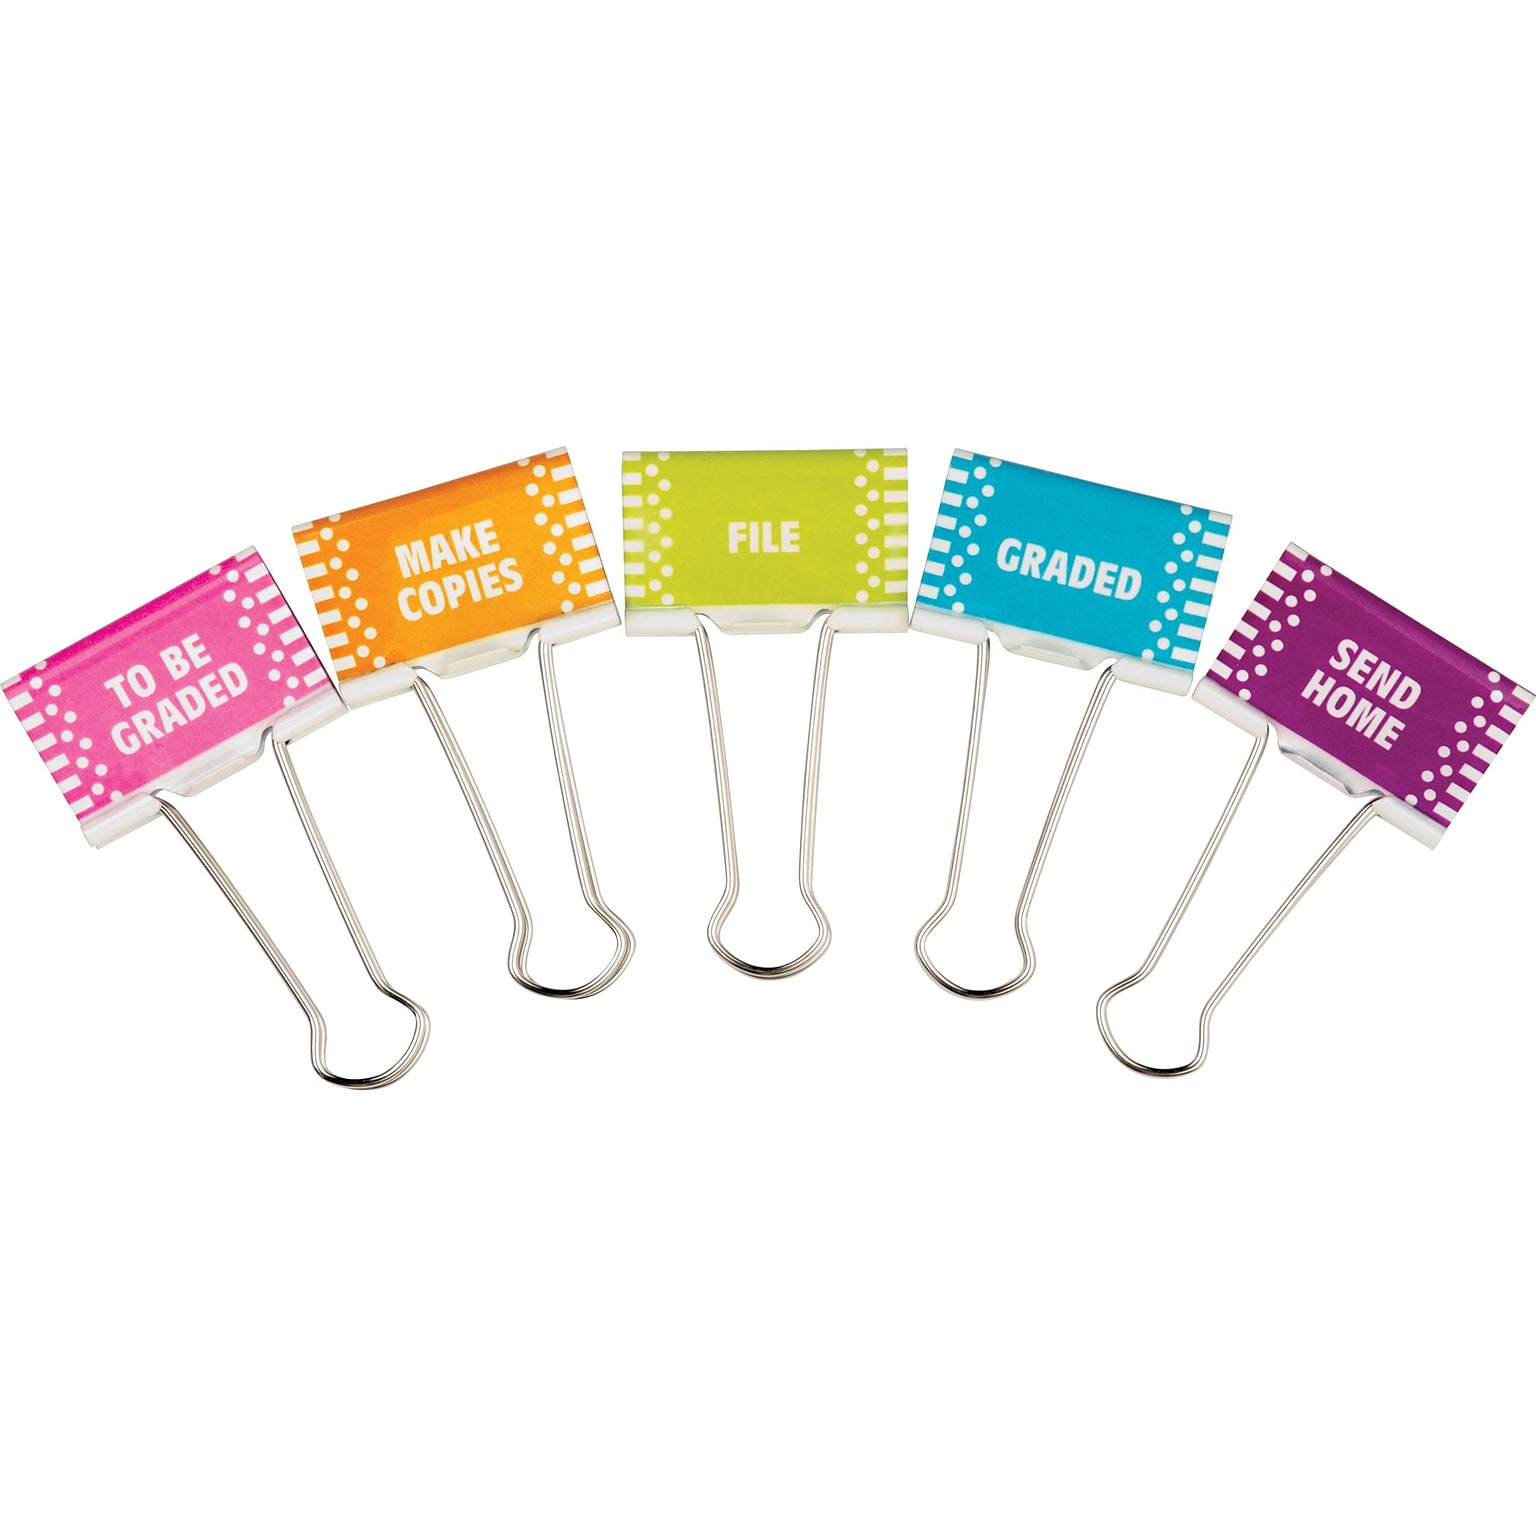 Teacher Created Resources 2 Classroom Management Large Colored Binder Clips, Assorted Colors (TCR20690)